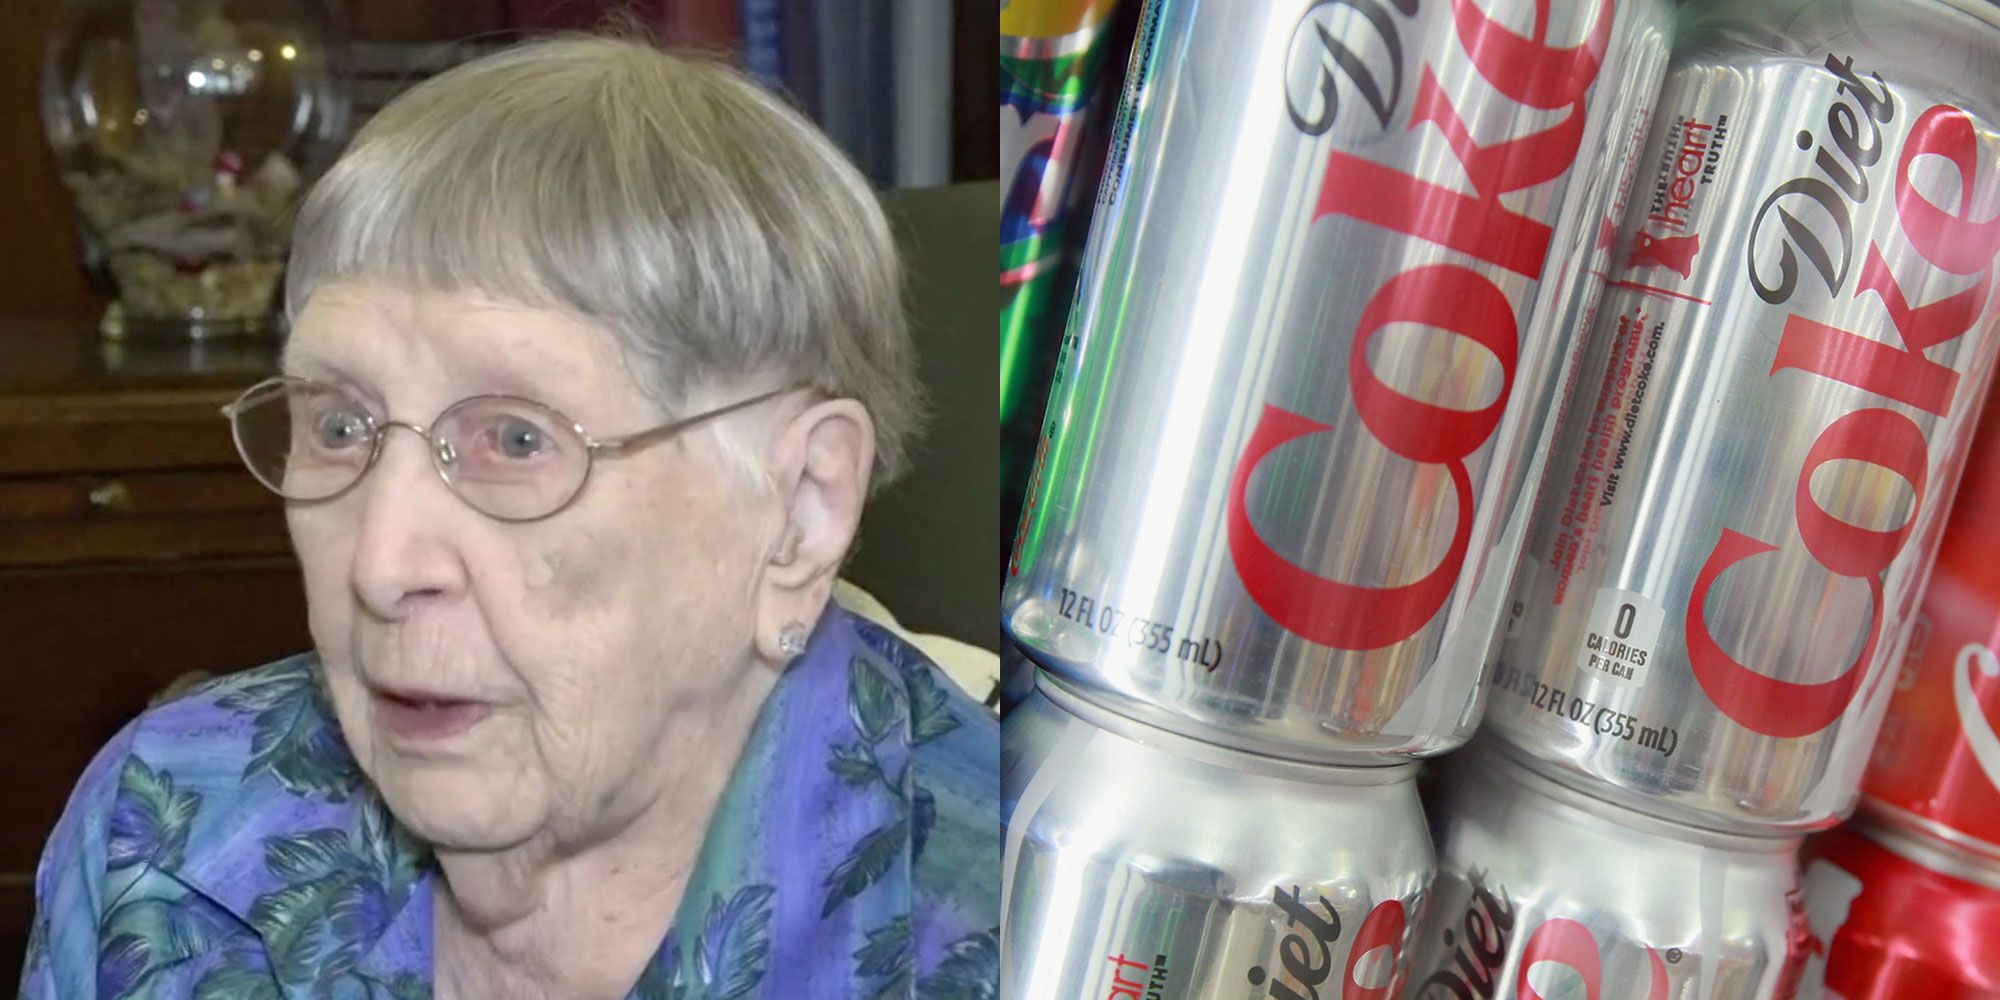 104 year old woman credits Diet Coke for living such a long life